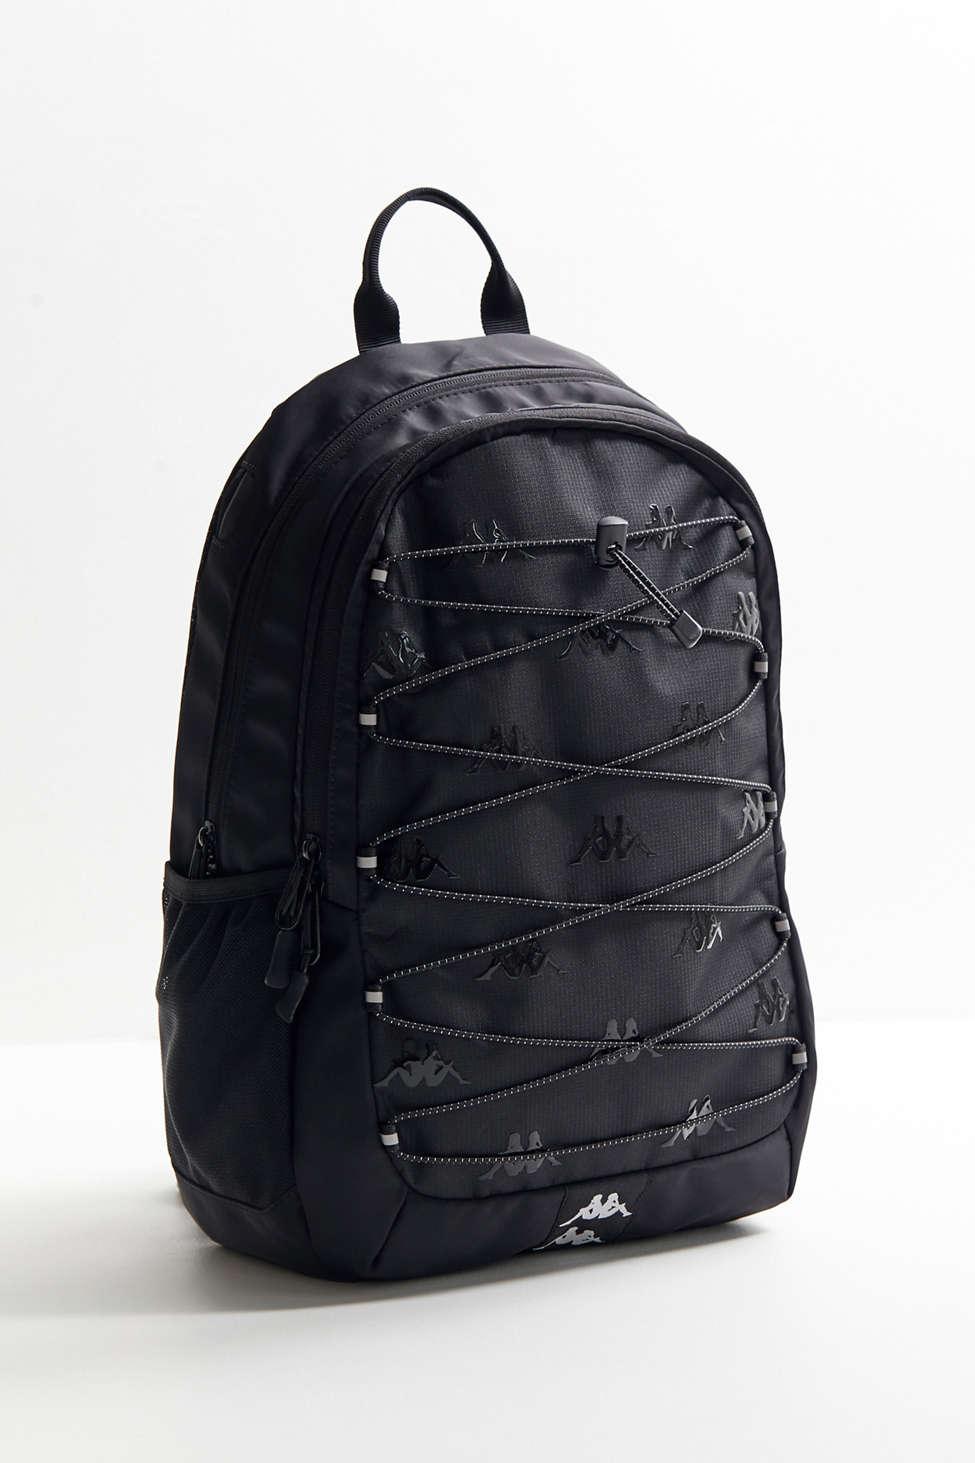 Inpakken Afwijking Ambacht Kappa The Premium Backpack In Black And White | Lyst